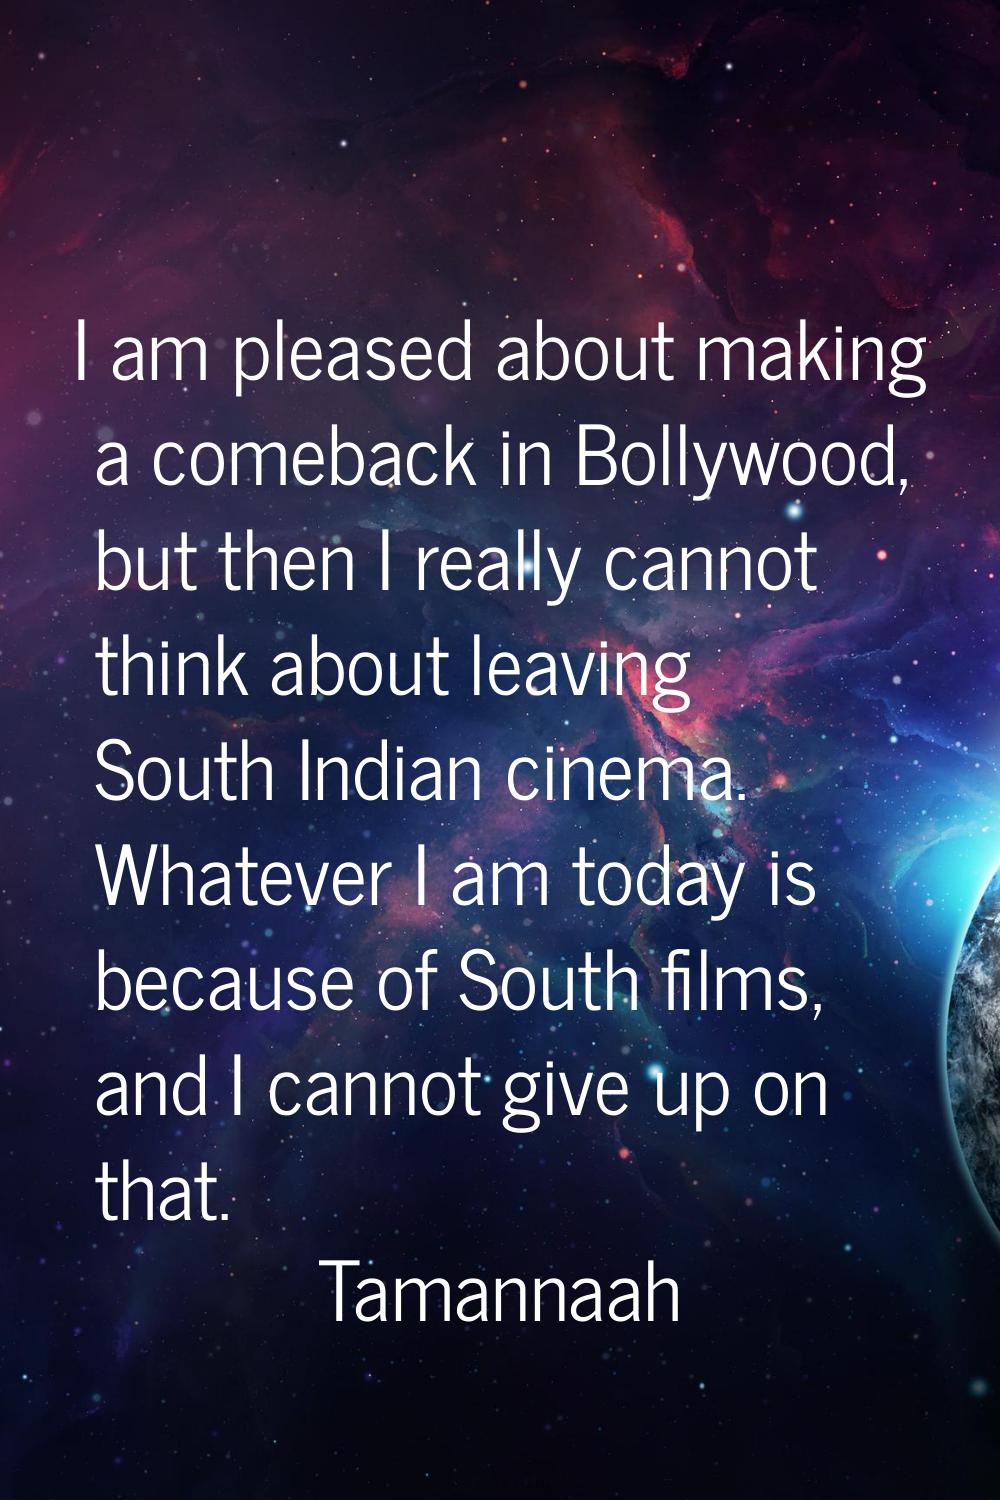 I am pleased about making a comeback in Bollywood, but then I really cannot think about leaving Sou